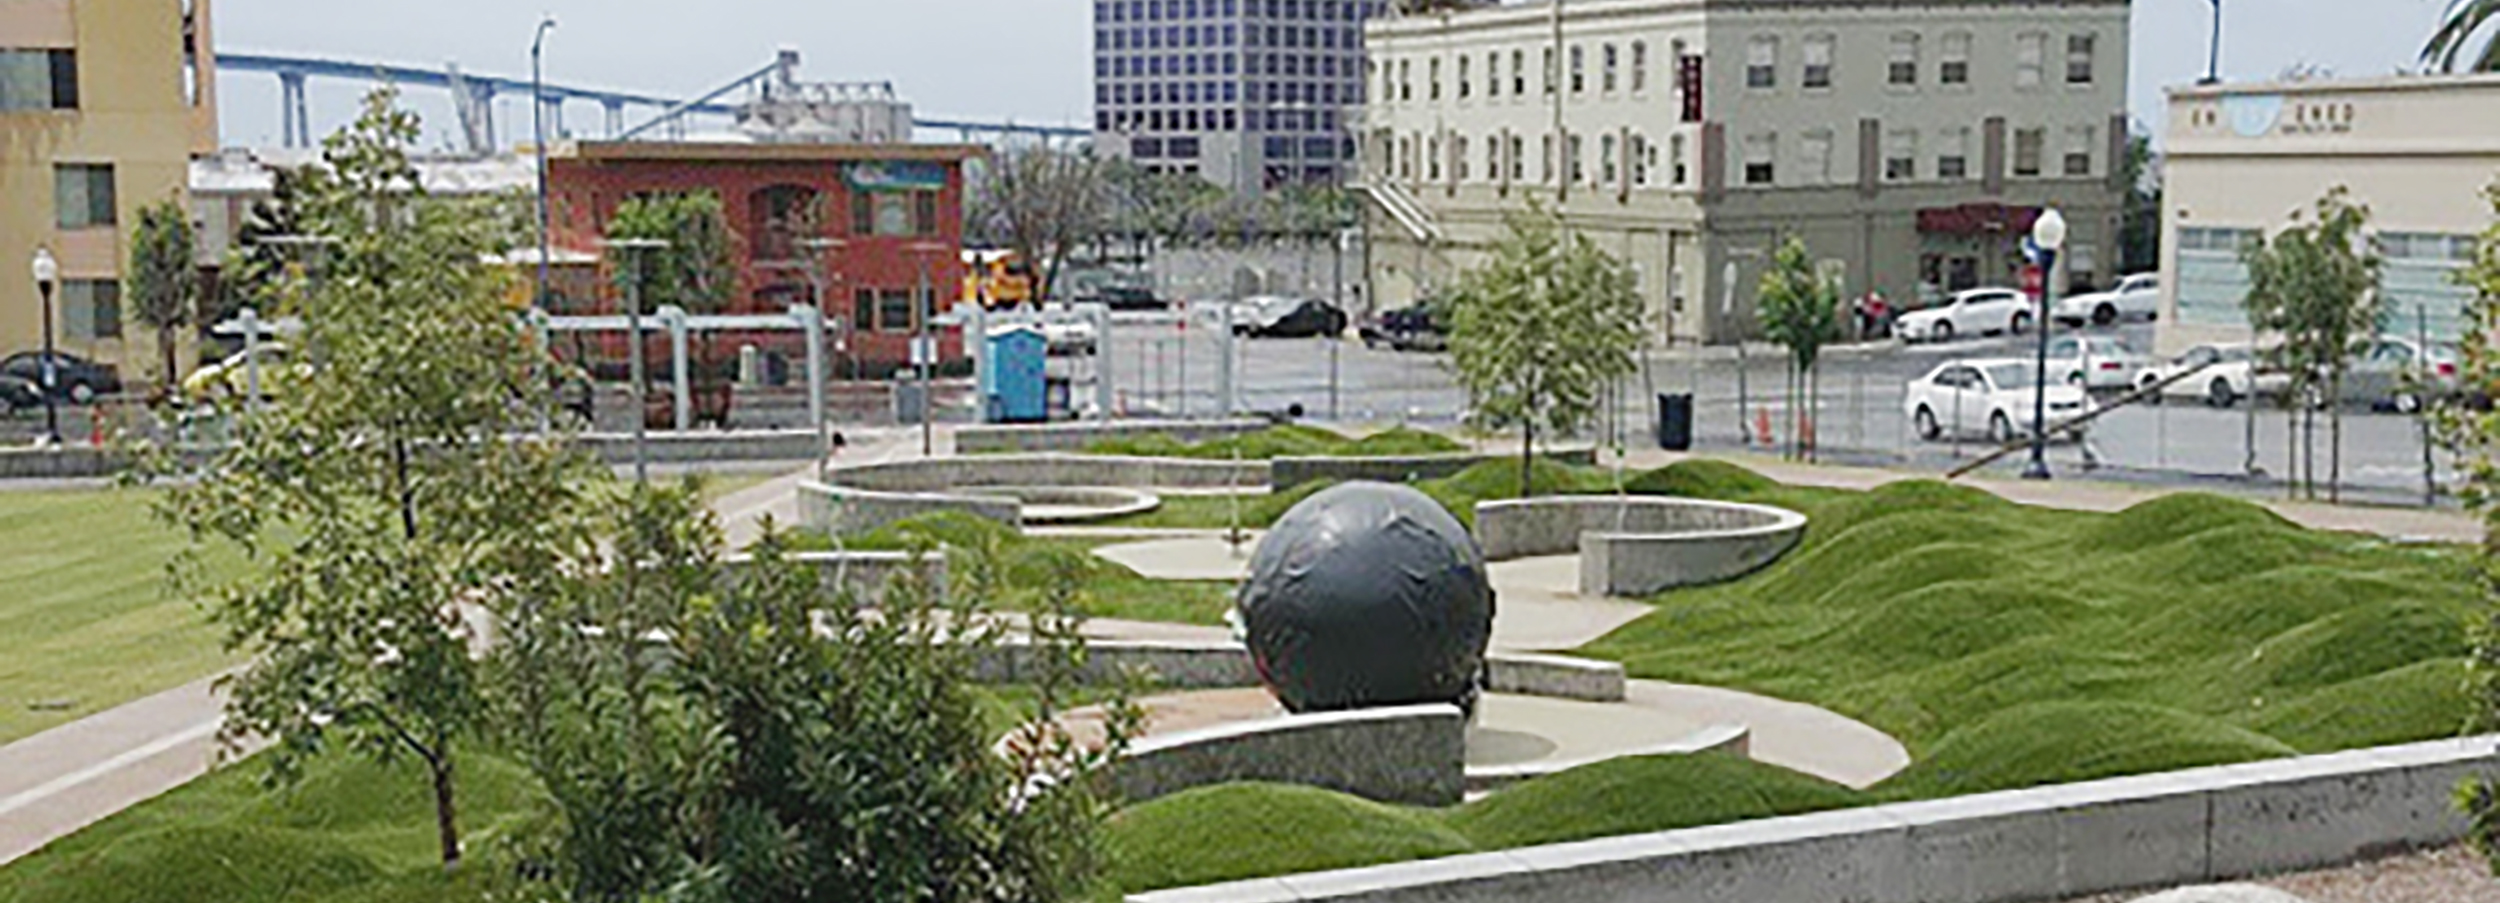 New downtown park – first in 11 years